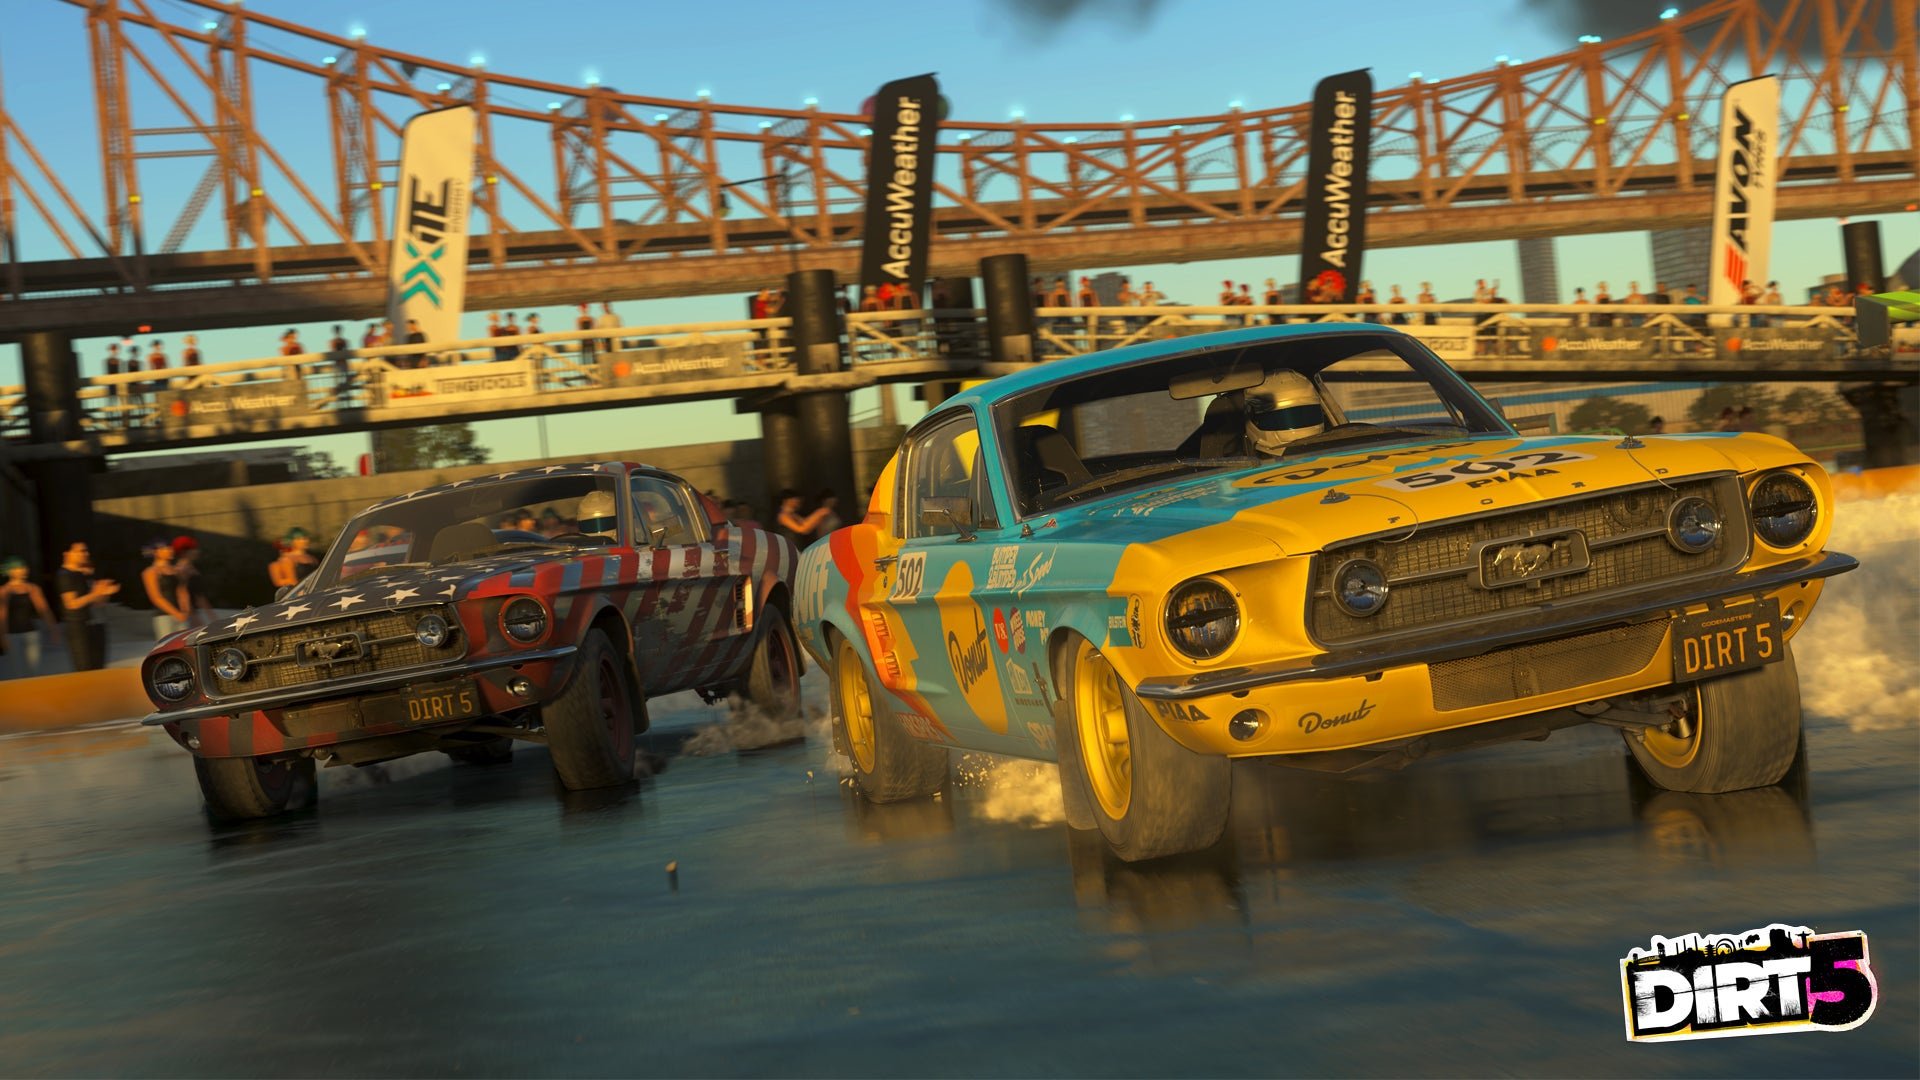 The best racing games on PS4 & PS5